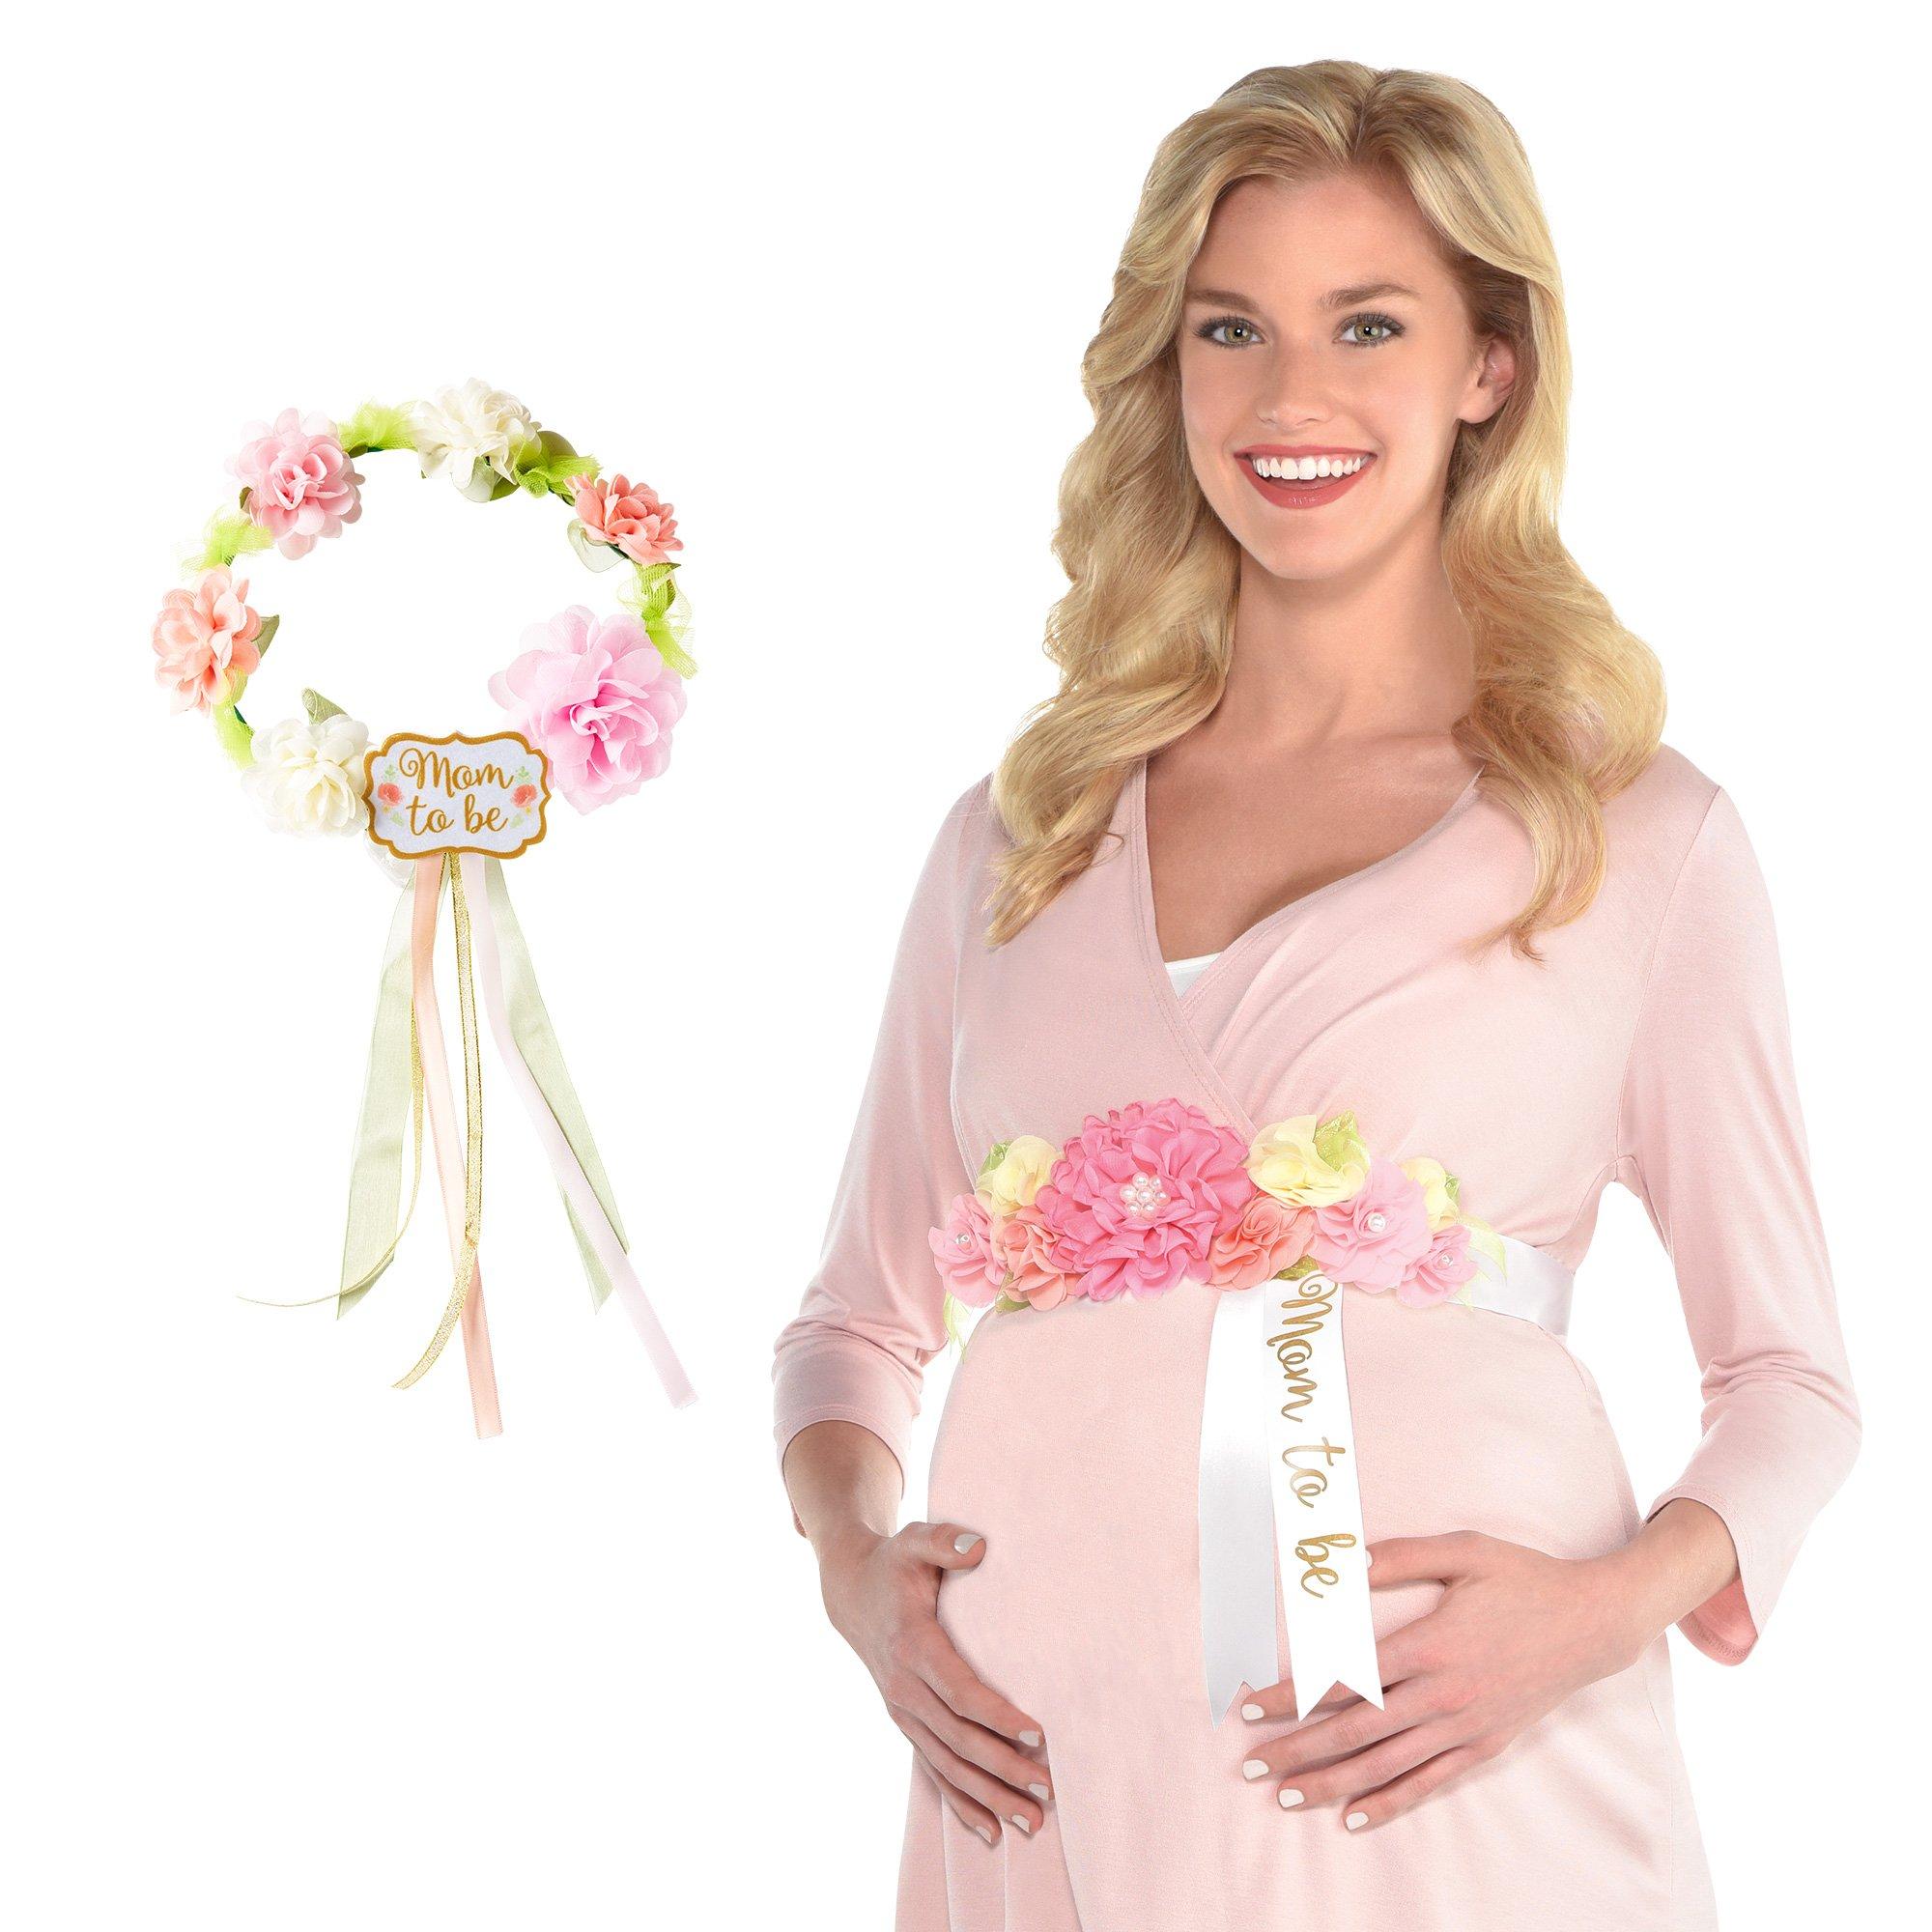 Mom-to-Be Belly Sash & Flower Crown Baby Shower Accessory Kit